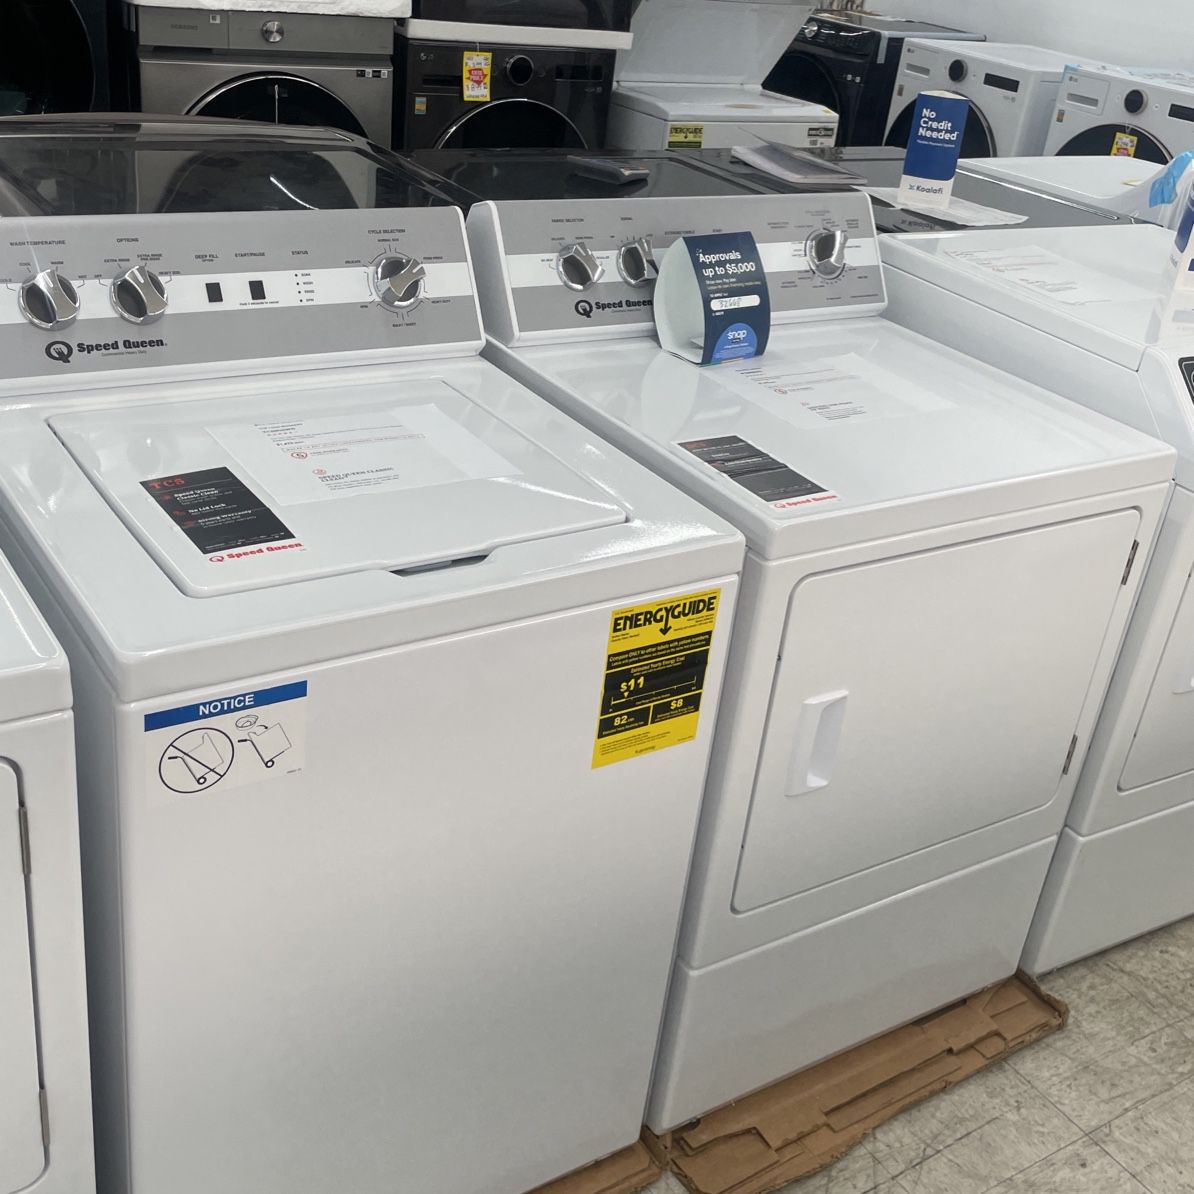 Speed Queen TC 5 Washer Heavy Commercial Duty 